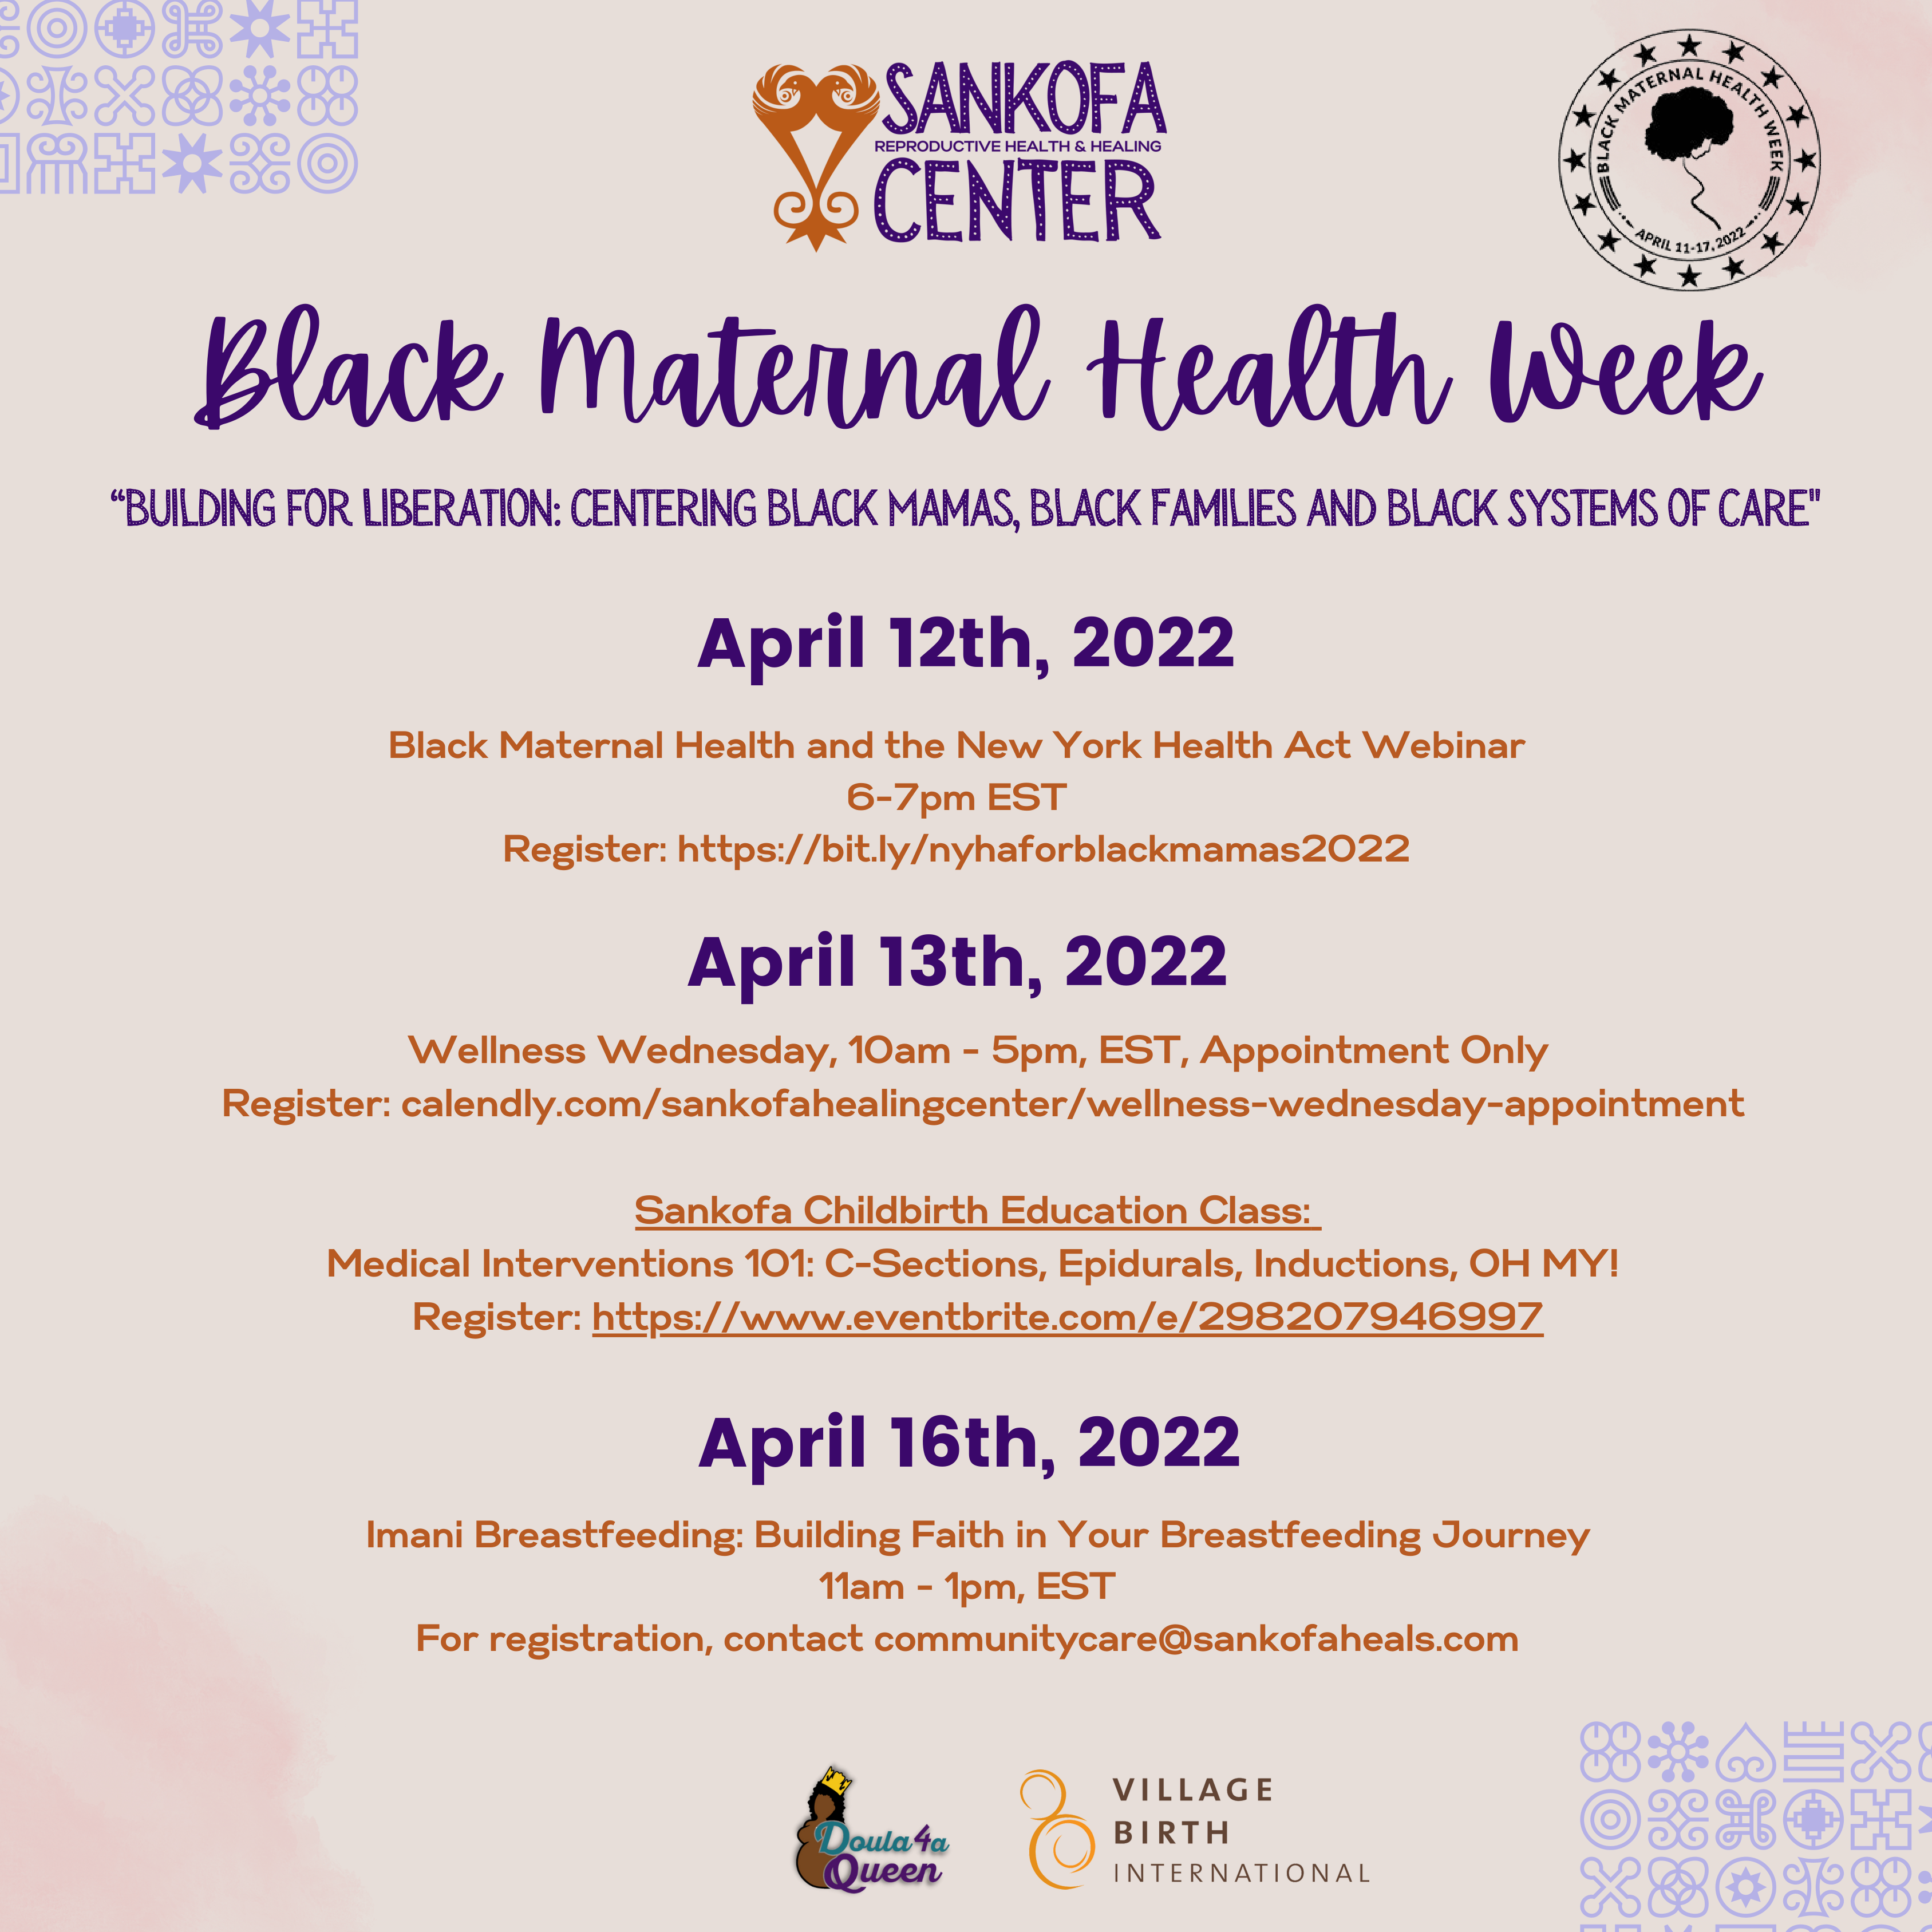 New York: 2022 BMHW EVENTS - Black Mamas Matter Alliance